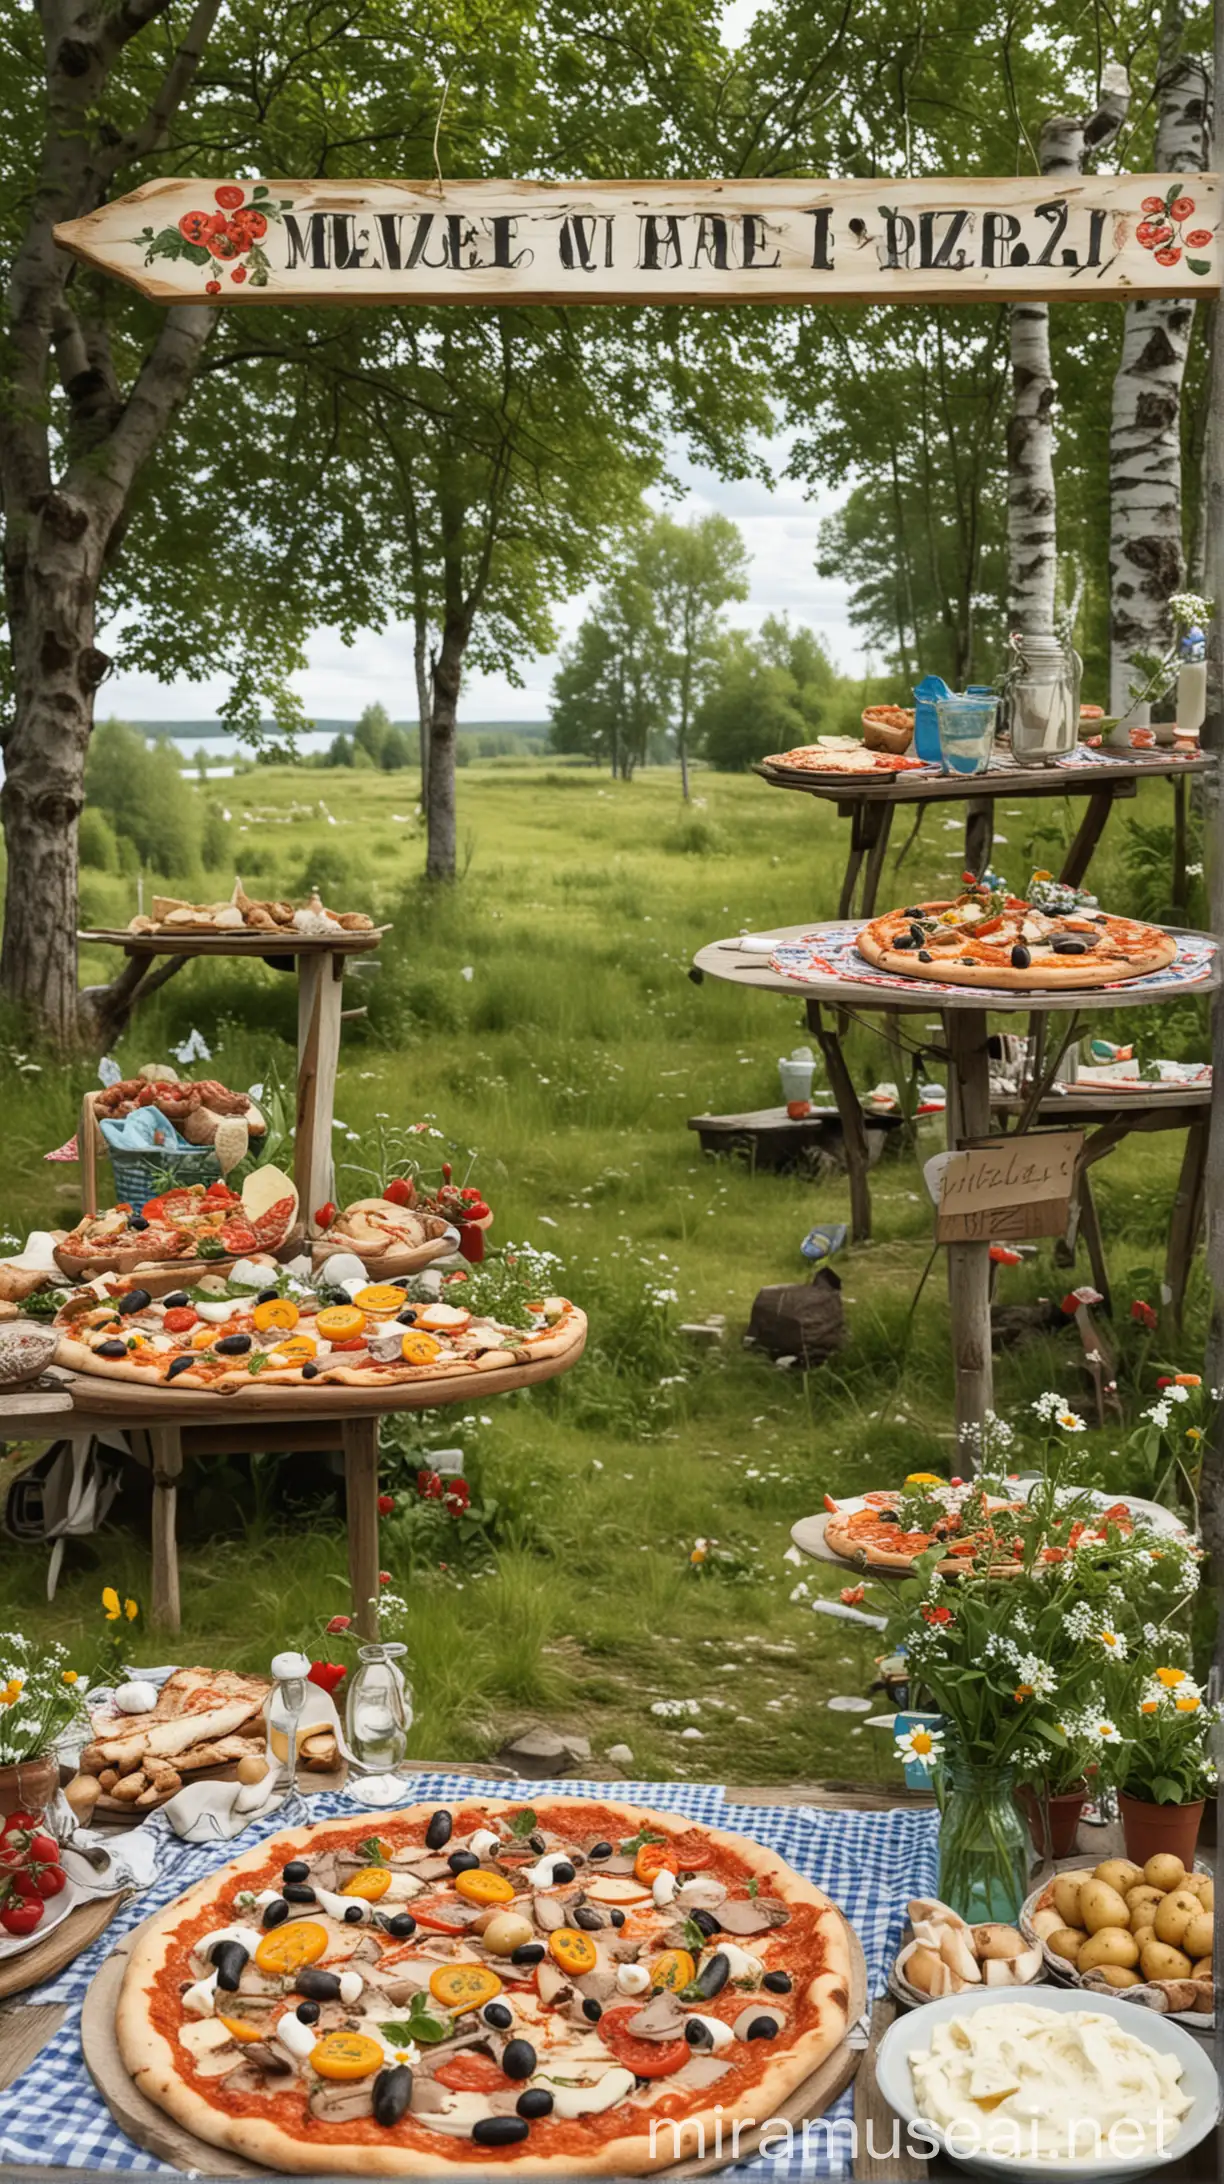 Create a lively and festive image that captures the essence of Swedish Midsummer. In the background, there is a traditional midsummer pole decorated with flowers and leaves, surrounded by people dancing and celebrating. In the foreground, there is a pizza stand with a large sign that says "Celebrate Midsummer with Pizza!". On the table in front, there are various types of pizzas topped with fresh Swedish ingredients such as herring, potatoes, and sour cream. Some people are standing at the stand, buying pizzas, smiling and happy. The sky is clear blue and sunny, and around the scene are typical Swedish summer landscapes with meadows and birch trees.